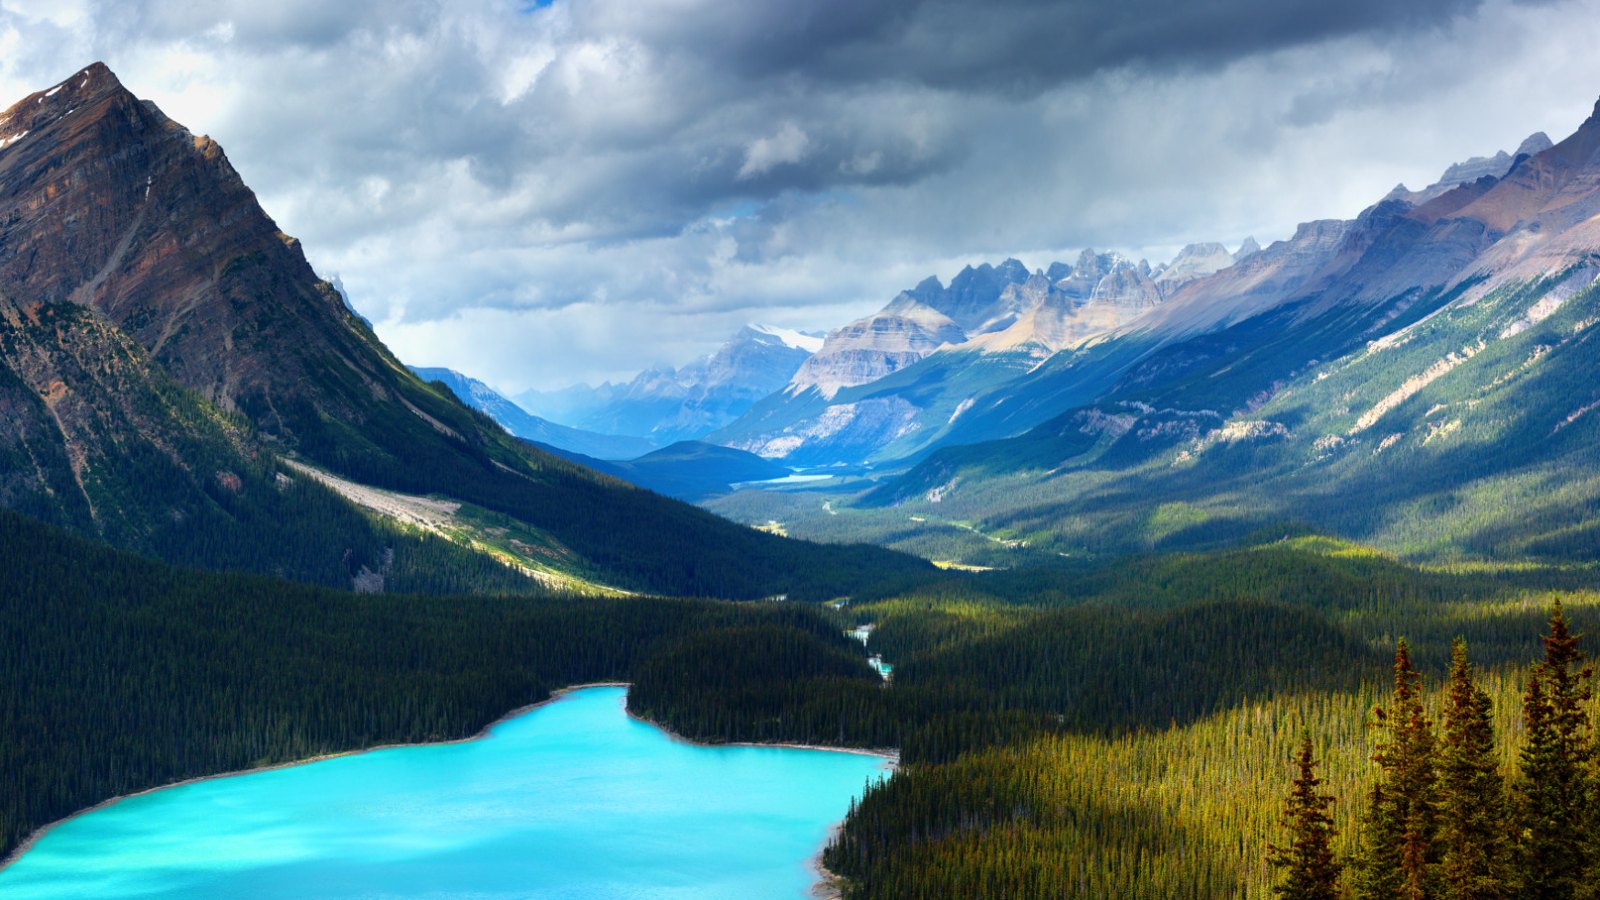 Lake surrounded by a dramatic mountain range